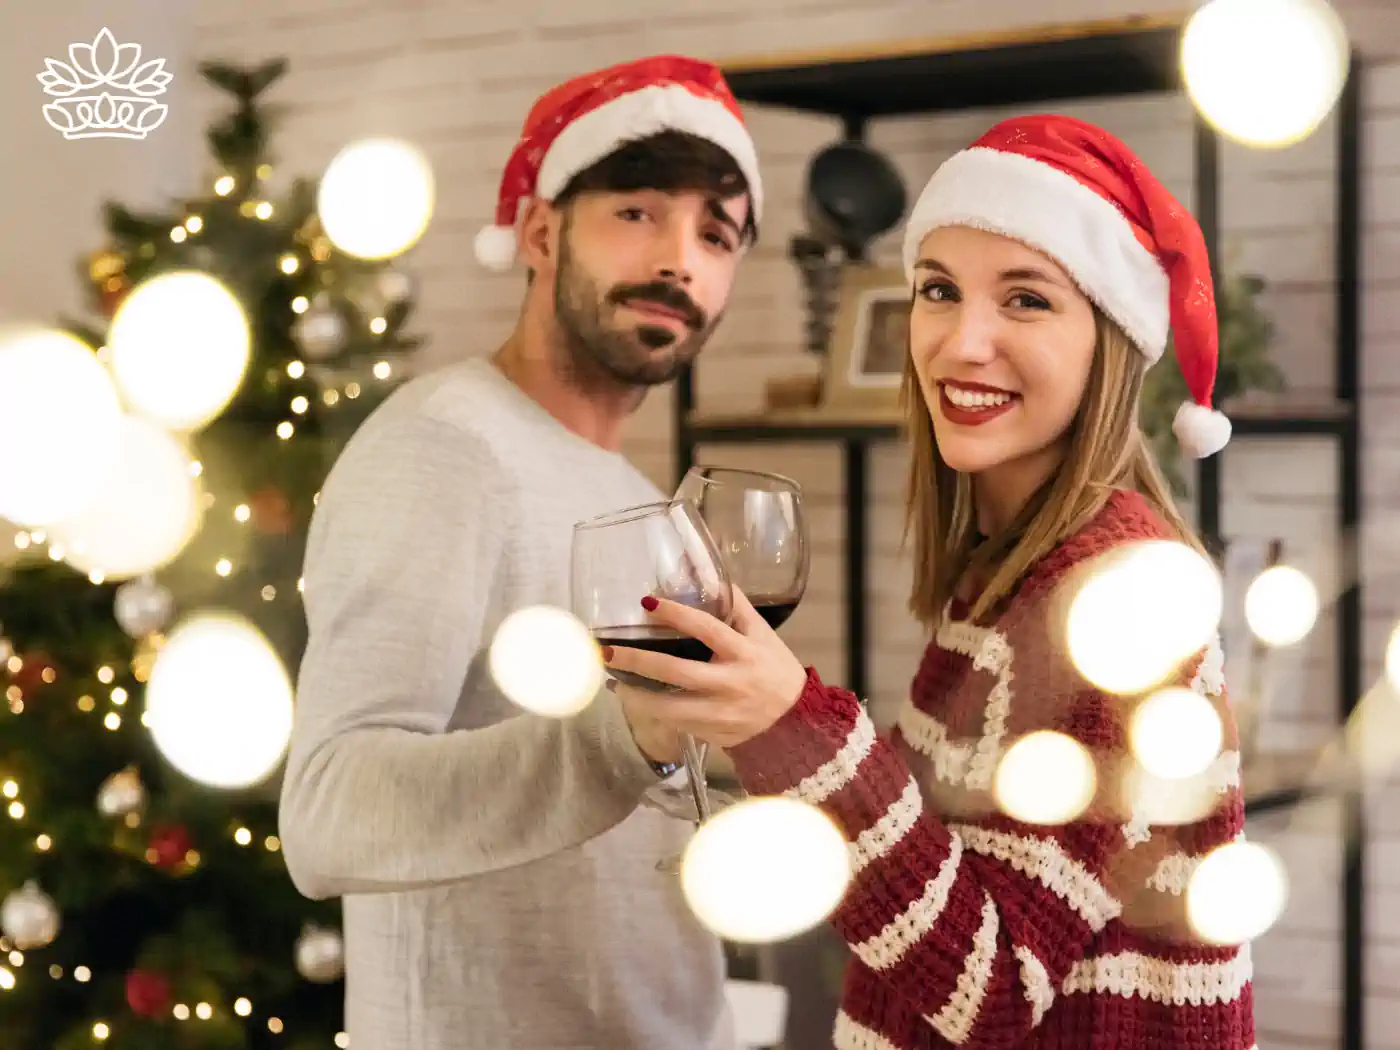 A couple in Santa hats toasting with wine glasses, surrounded by festive lights and a beautifully decorated tree, symbolizing holiday cheer. Part of the Festive Season Flowers Collection. Delivered with Heart by Fabulous Flowers and Gifts.